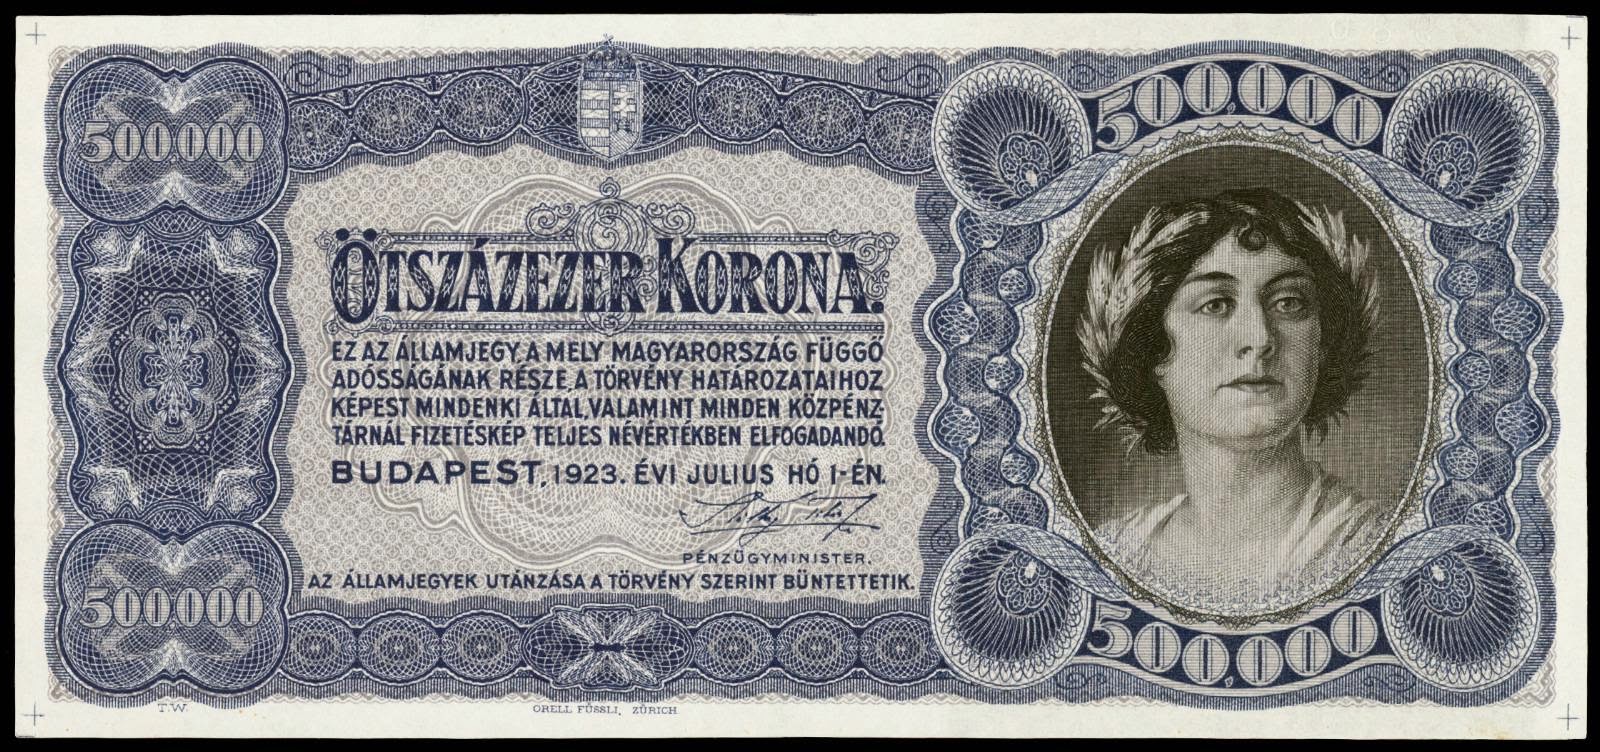 hungary-500000-korona-banknote-1923-world-banknotes-coins-pictures